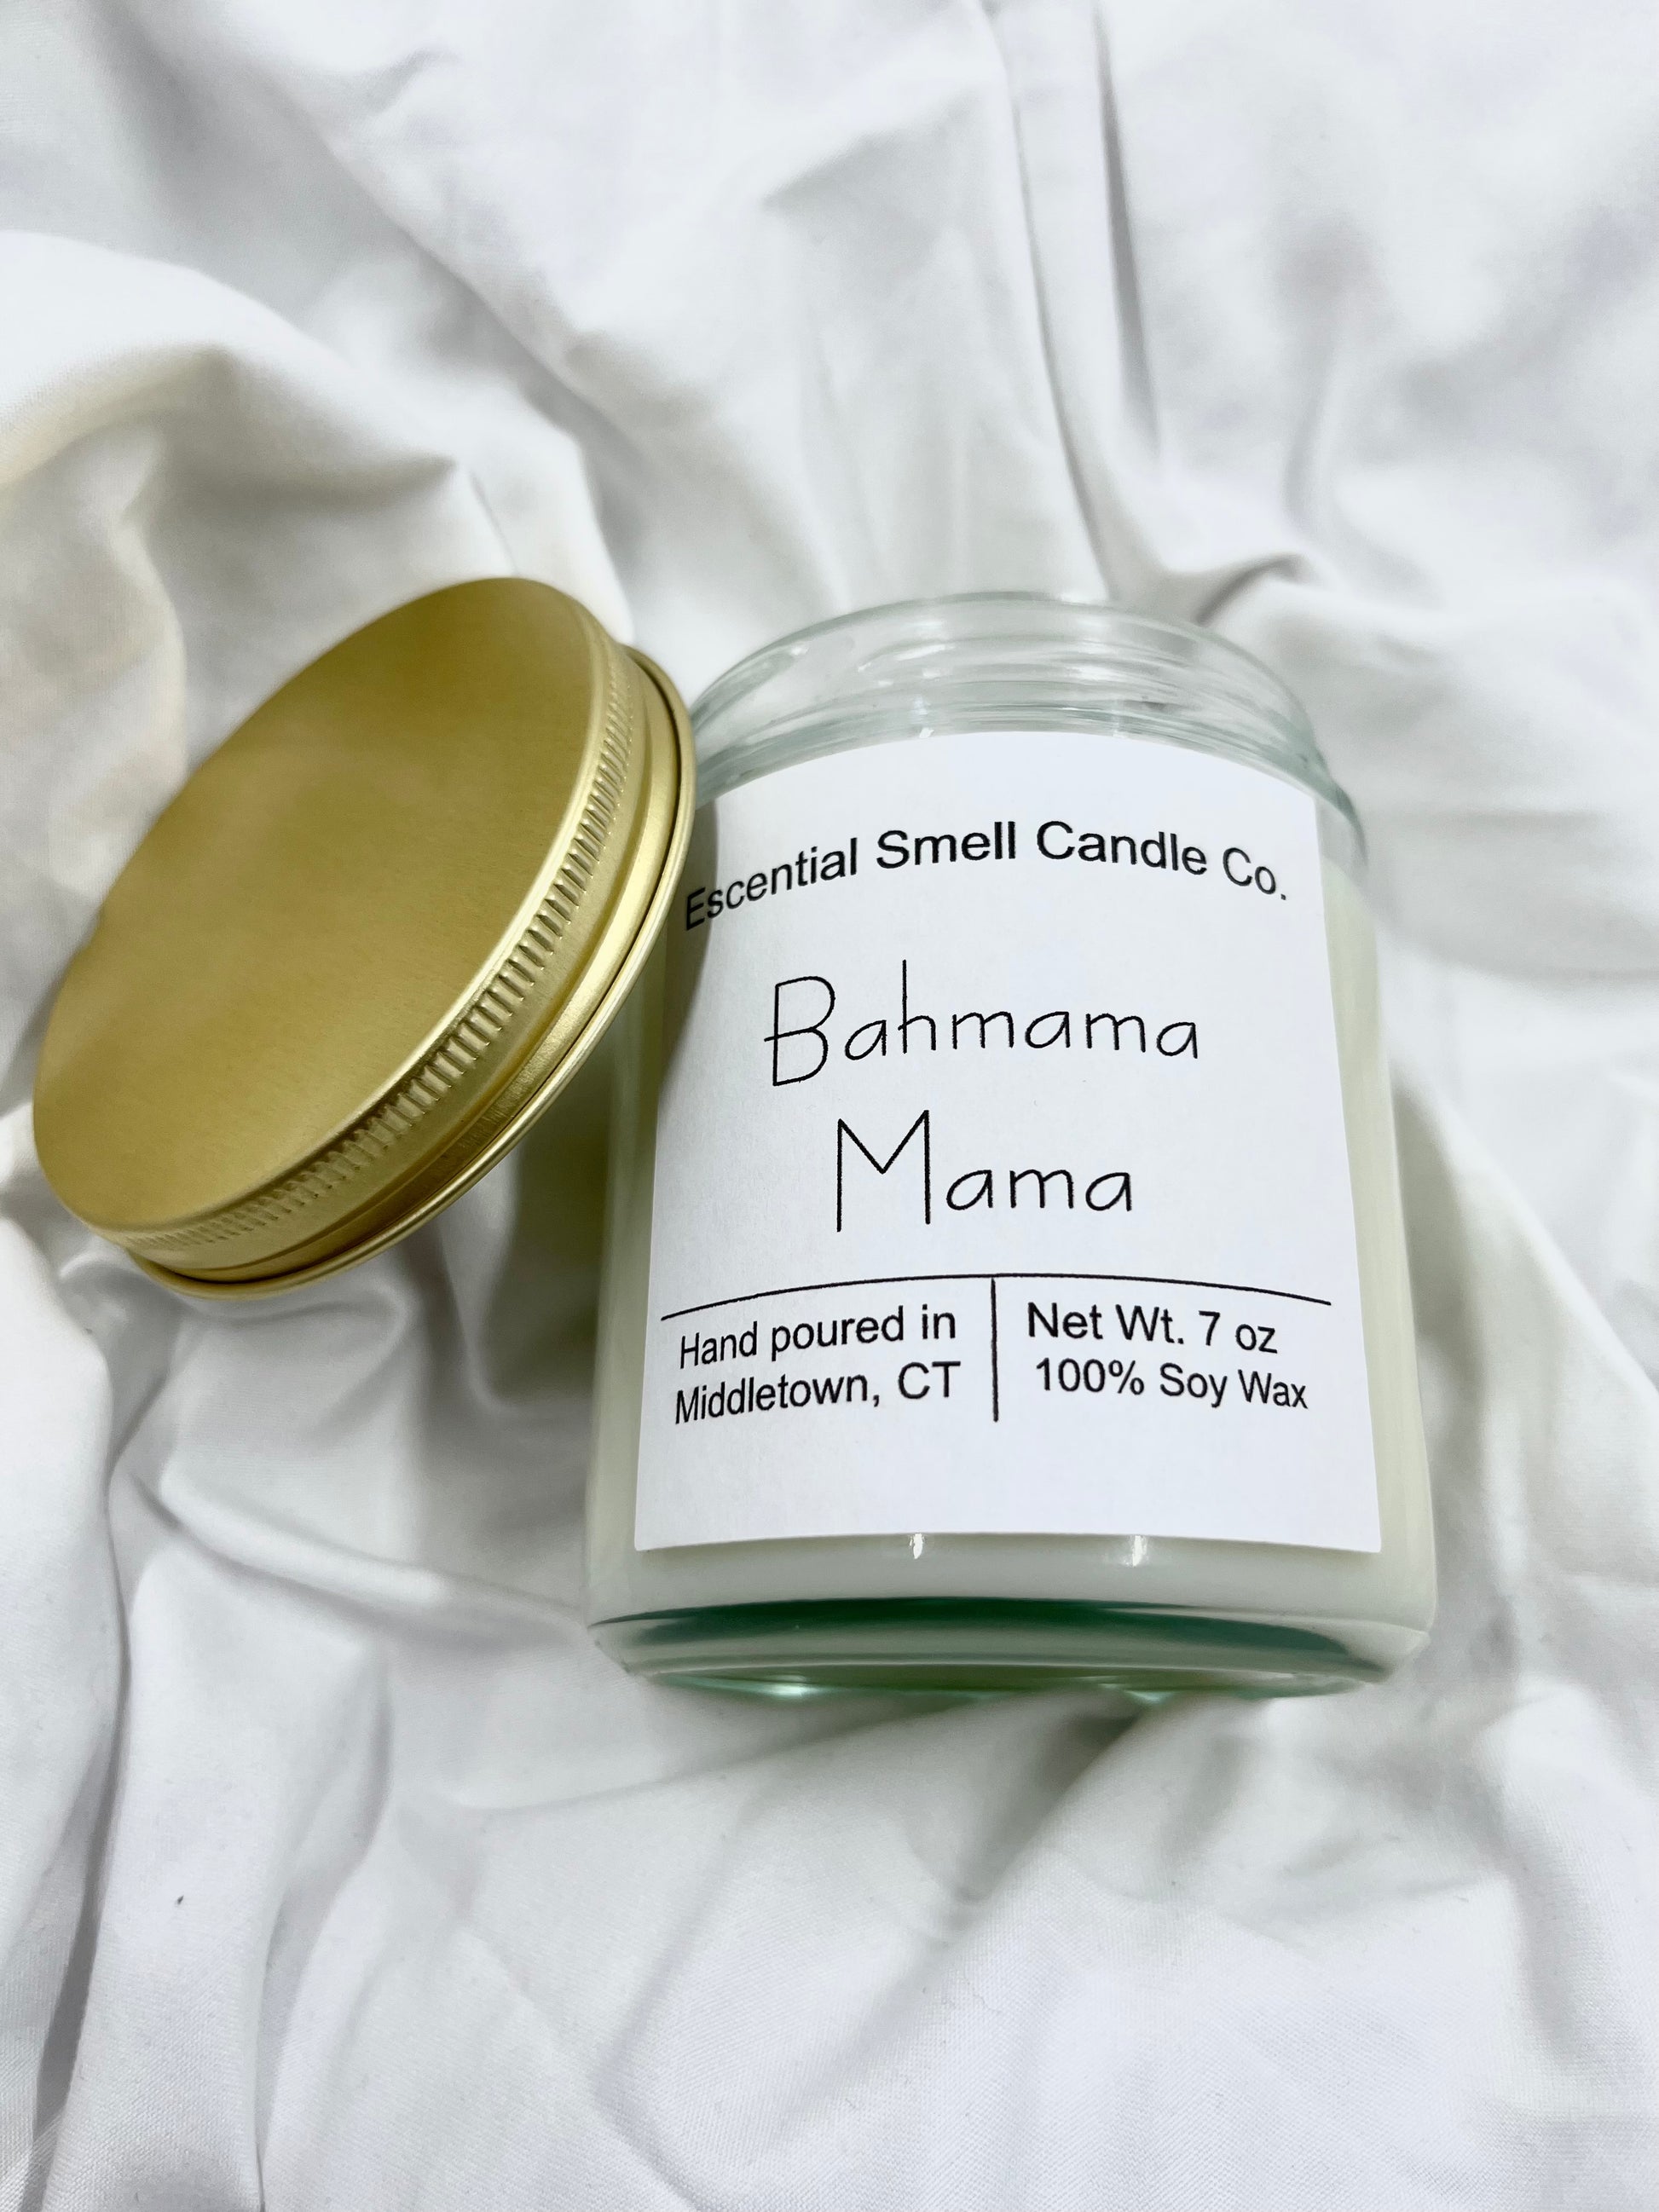 In need of a vacation but no time to travel? Bahama Mama is a very tropical scent that will have you feel like you're on a beach in no time!